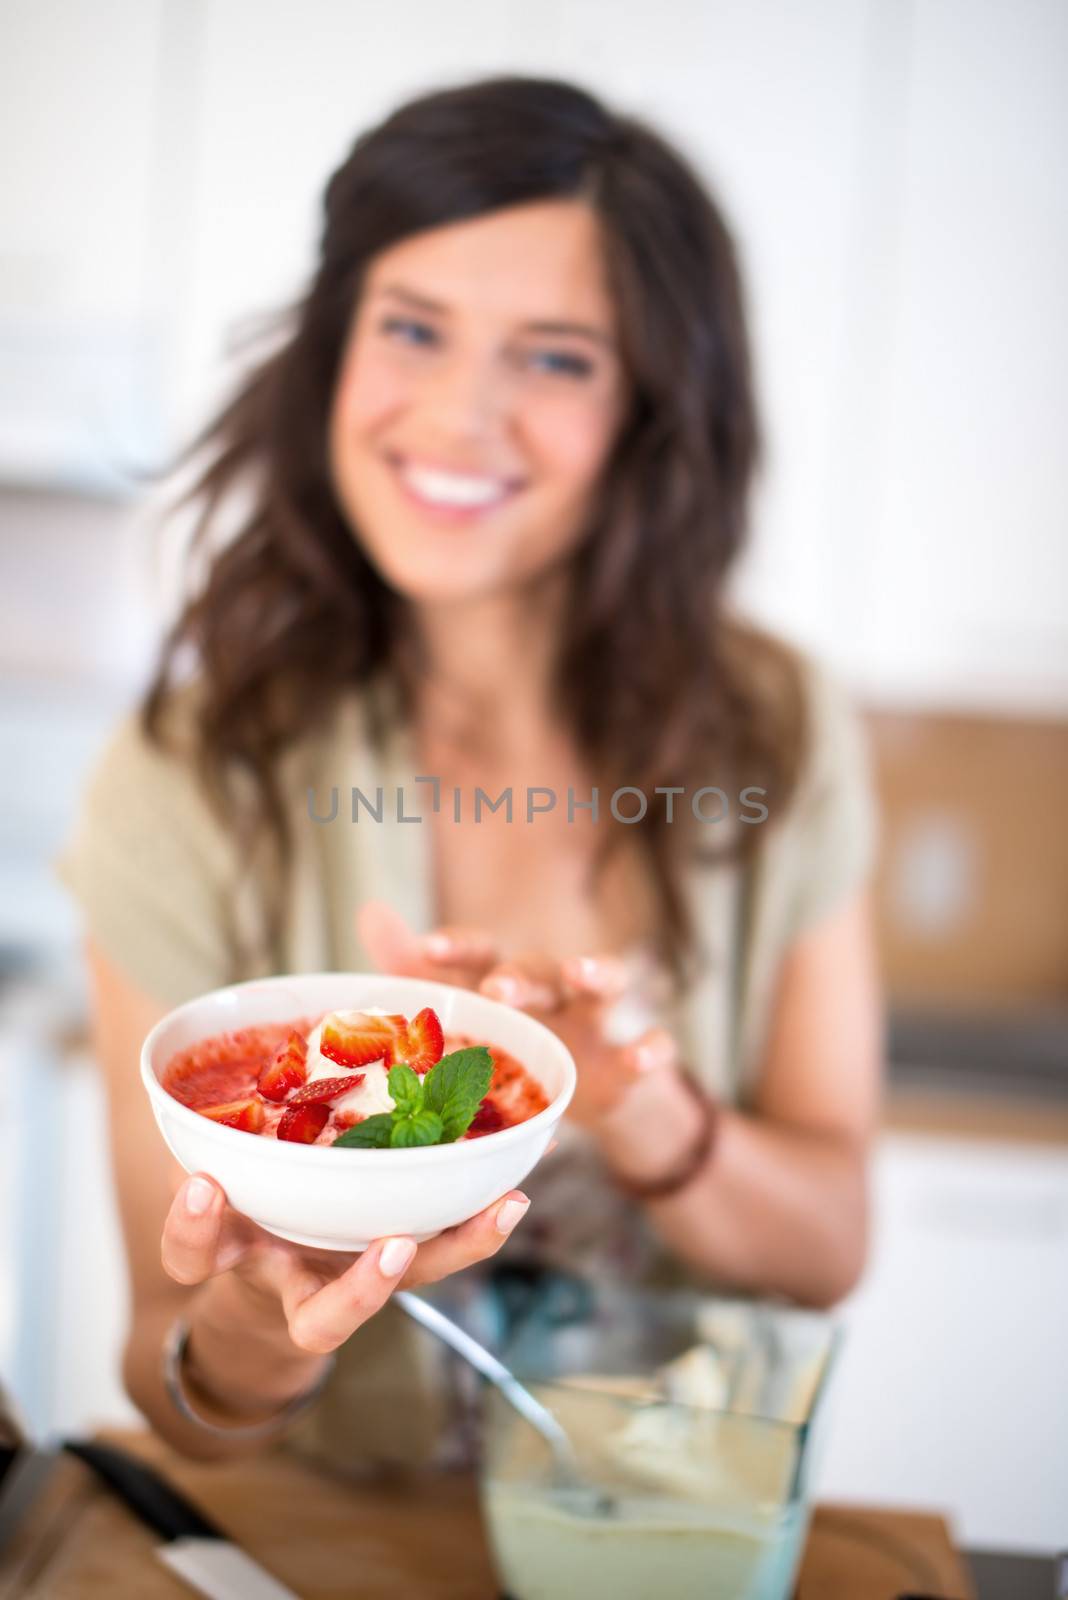 Attractive woman preparing fruits in the blender